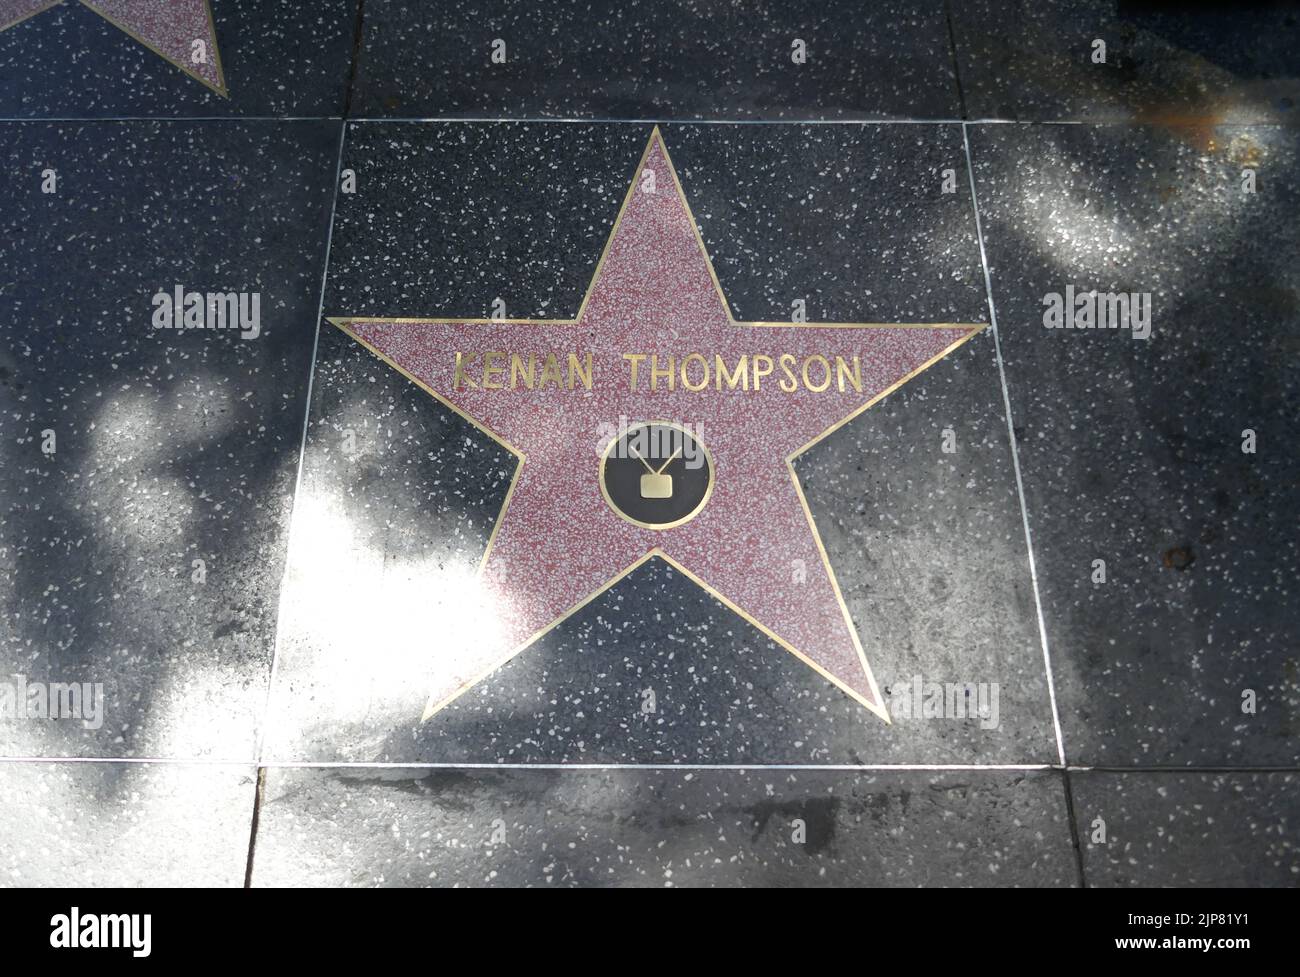 Los Angeles, California, USA 15th August 2022 Actor Kenan Thompson's Hollywood Walk of Fame Star on August 15, 2022 in Los Angeles, California, USA. Photo by Barry King/Alamy Stock Photo Stock Photo